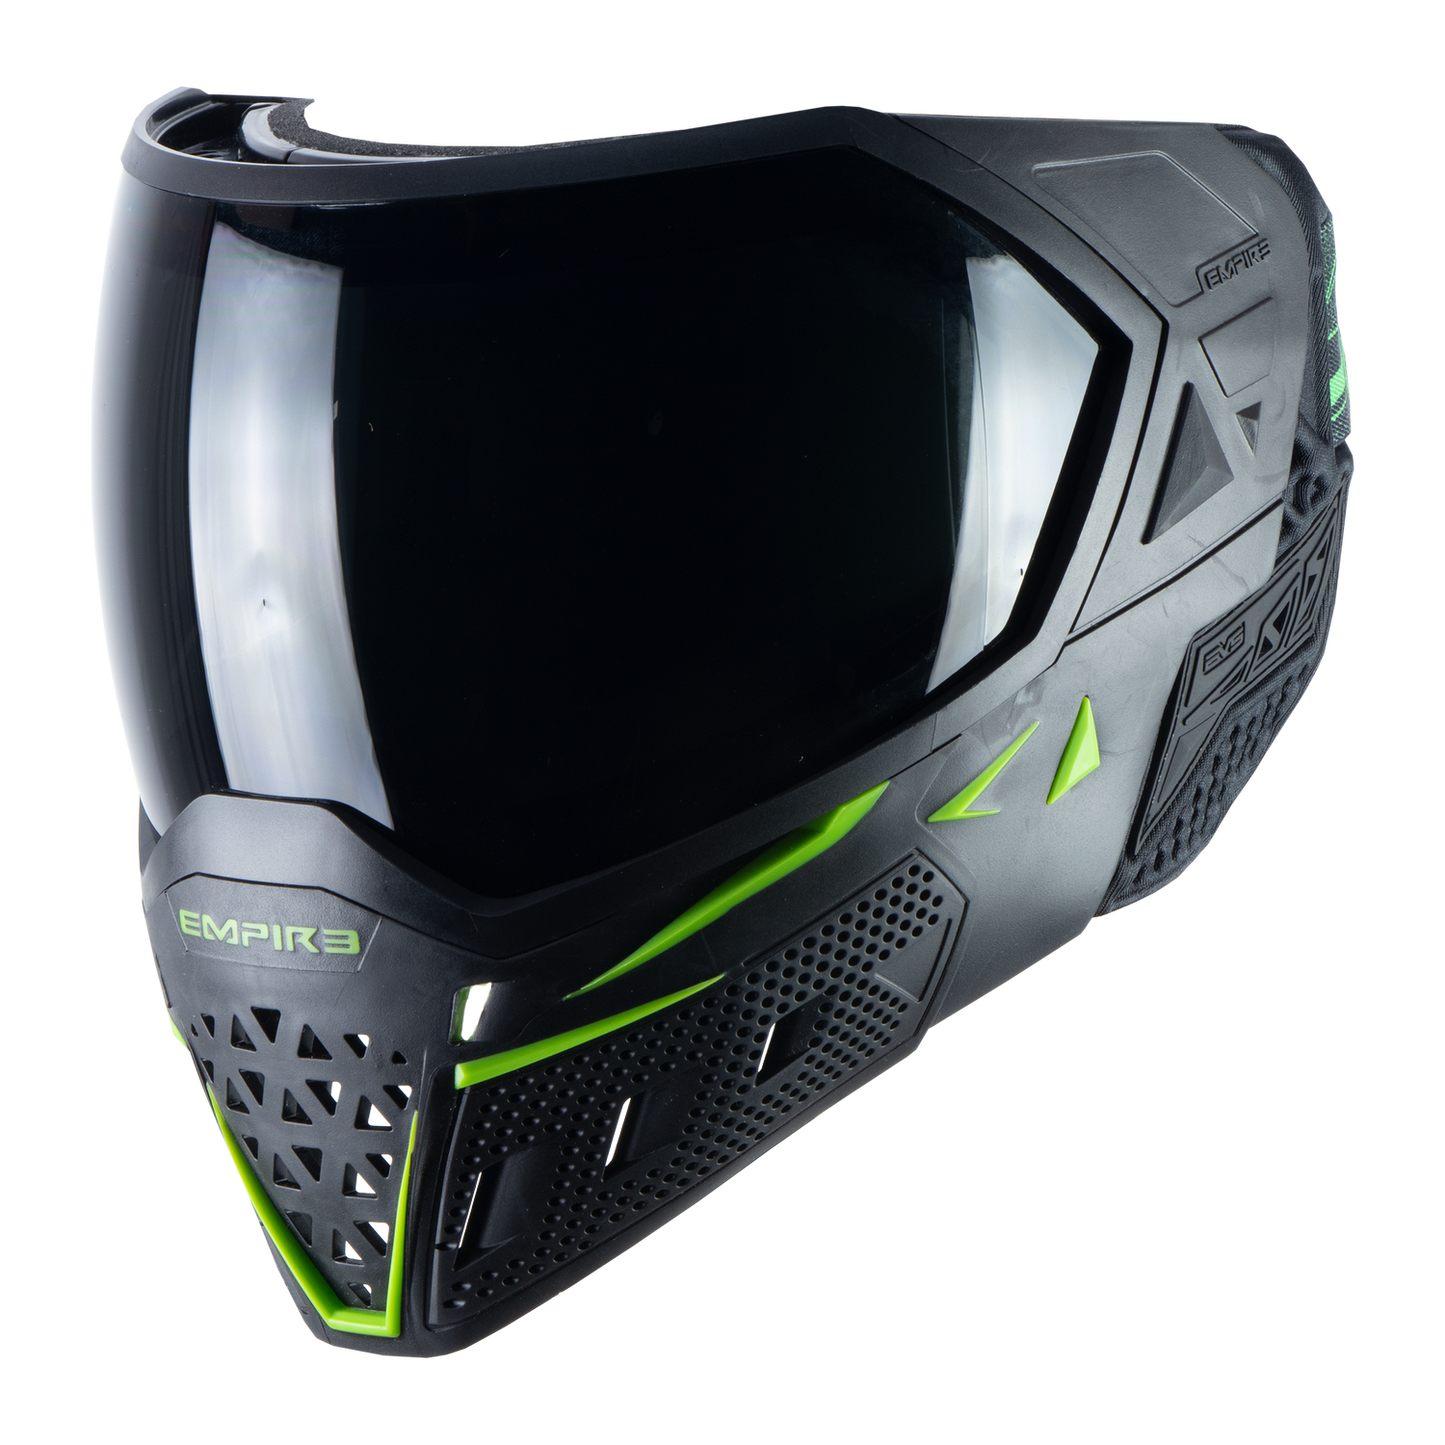 Empire EVS Goggle - Black/Lime Green - with 2 lenses [Thermal Ninja & Thermal Clear]